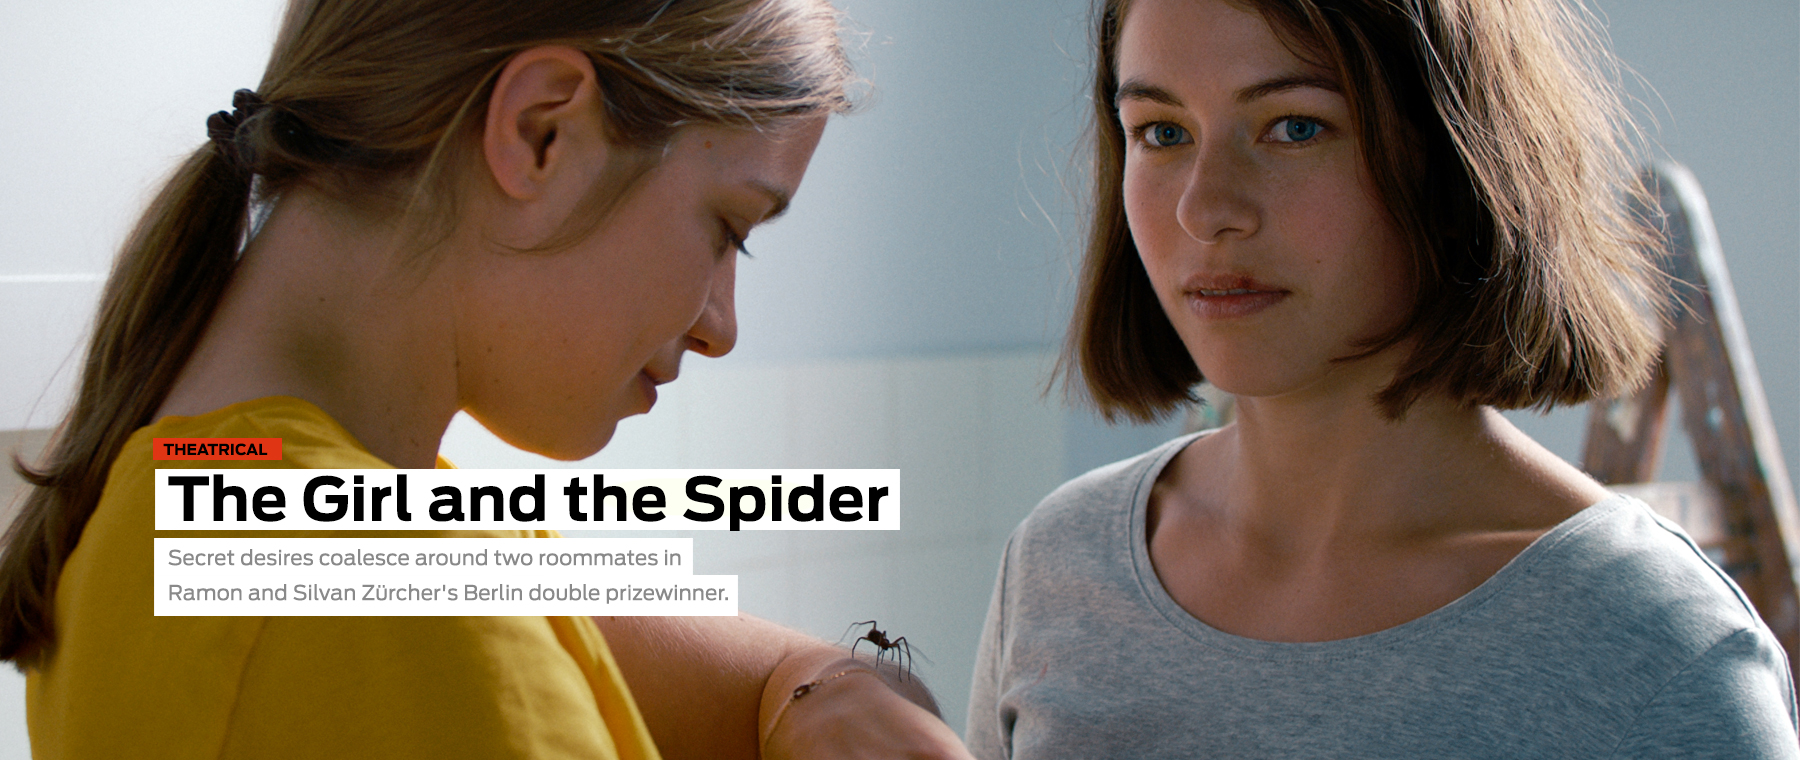 The Girl and the Spider